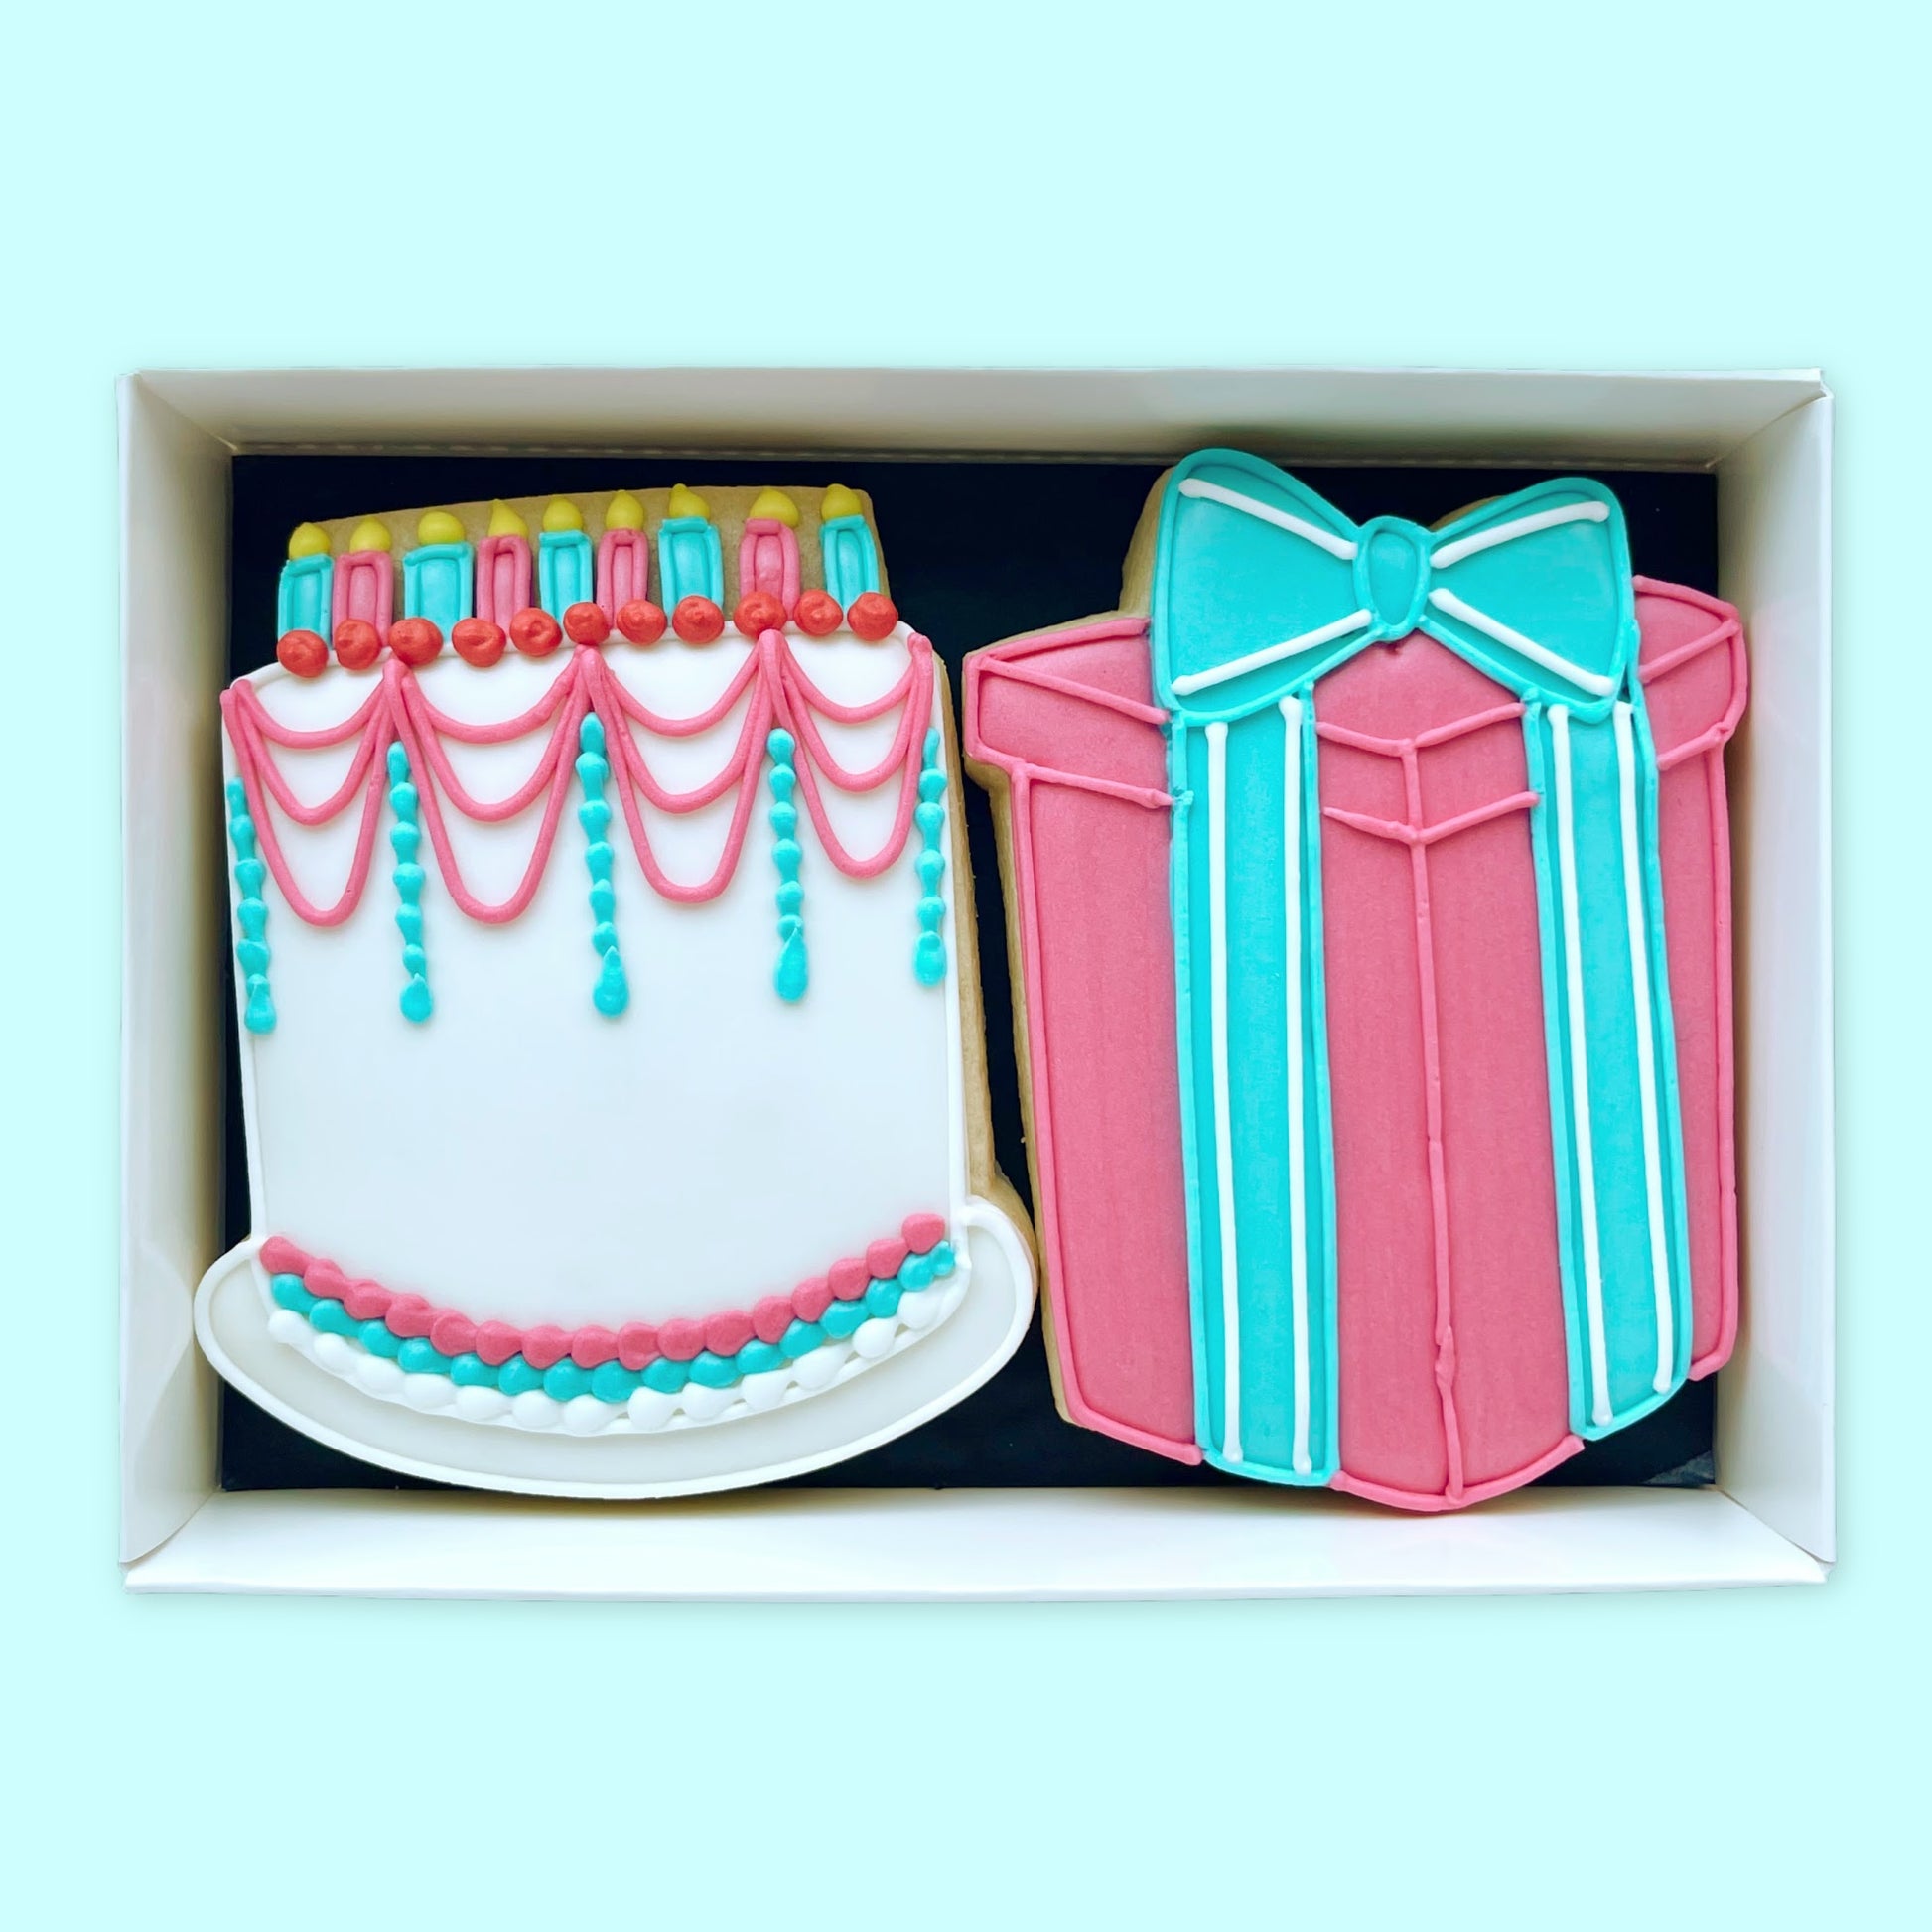 Hand iced Birthday cake with candles and gift with bow biscuits in shades of white blue and pink. in an open white gift box by Katie's biscuit shop